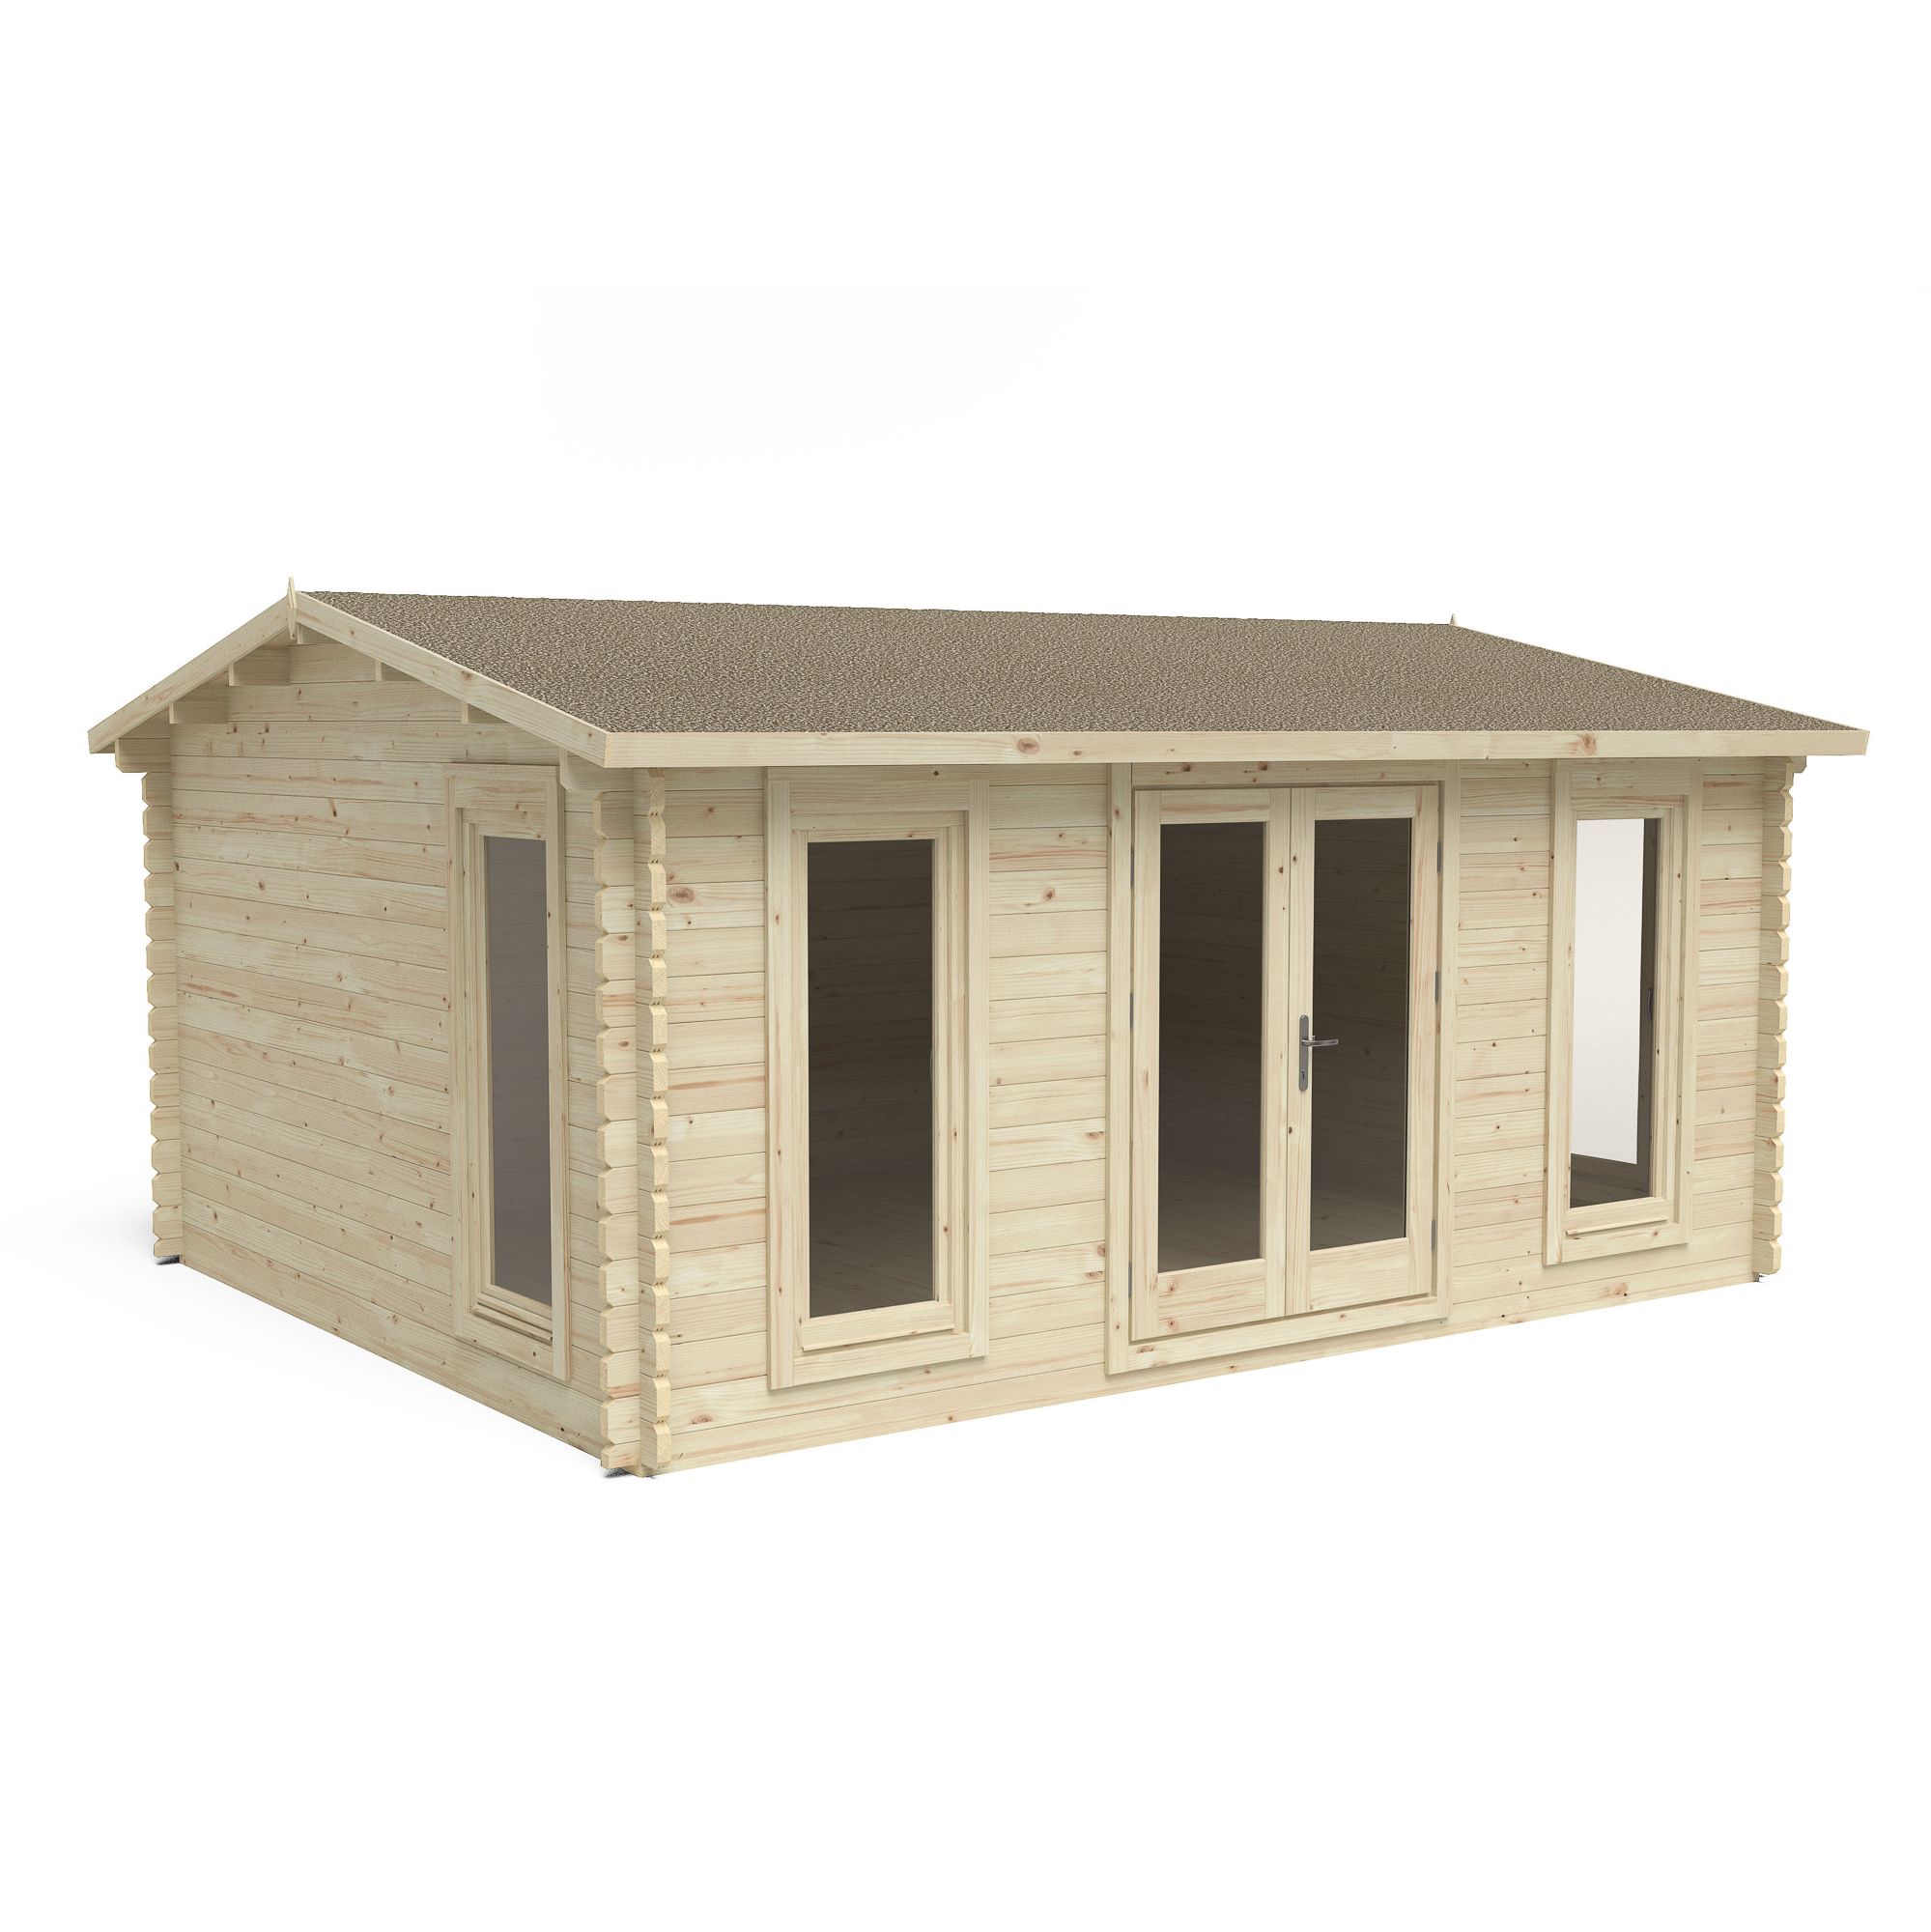 Forest Garden Rushock 5x4 ft Toughened glass with Double door Apex Wooden Cabin - Assembly service included